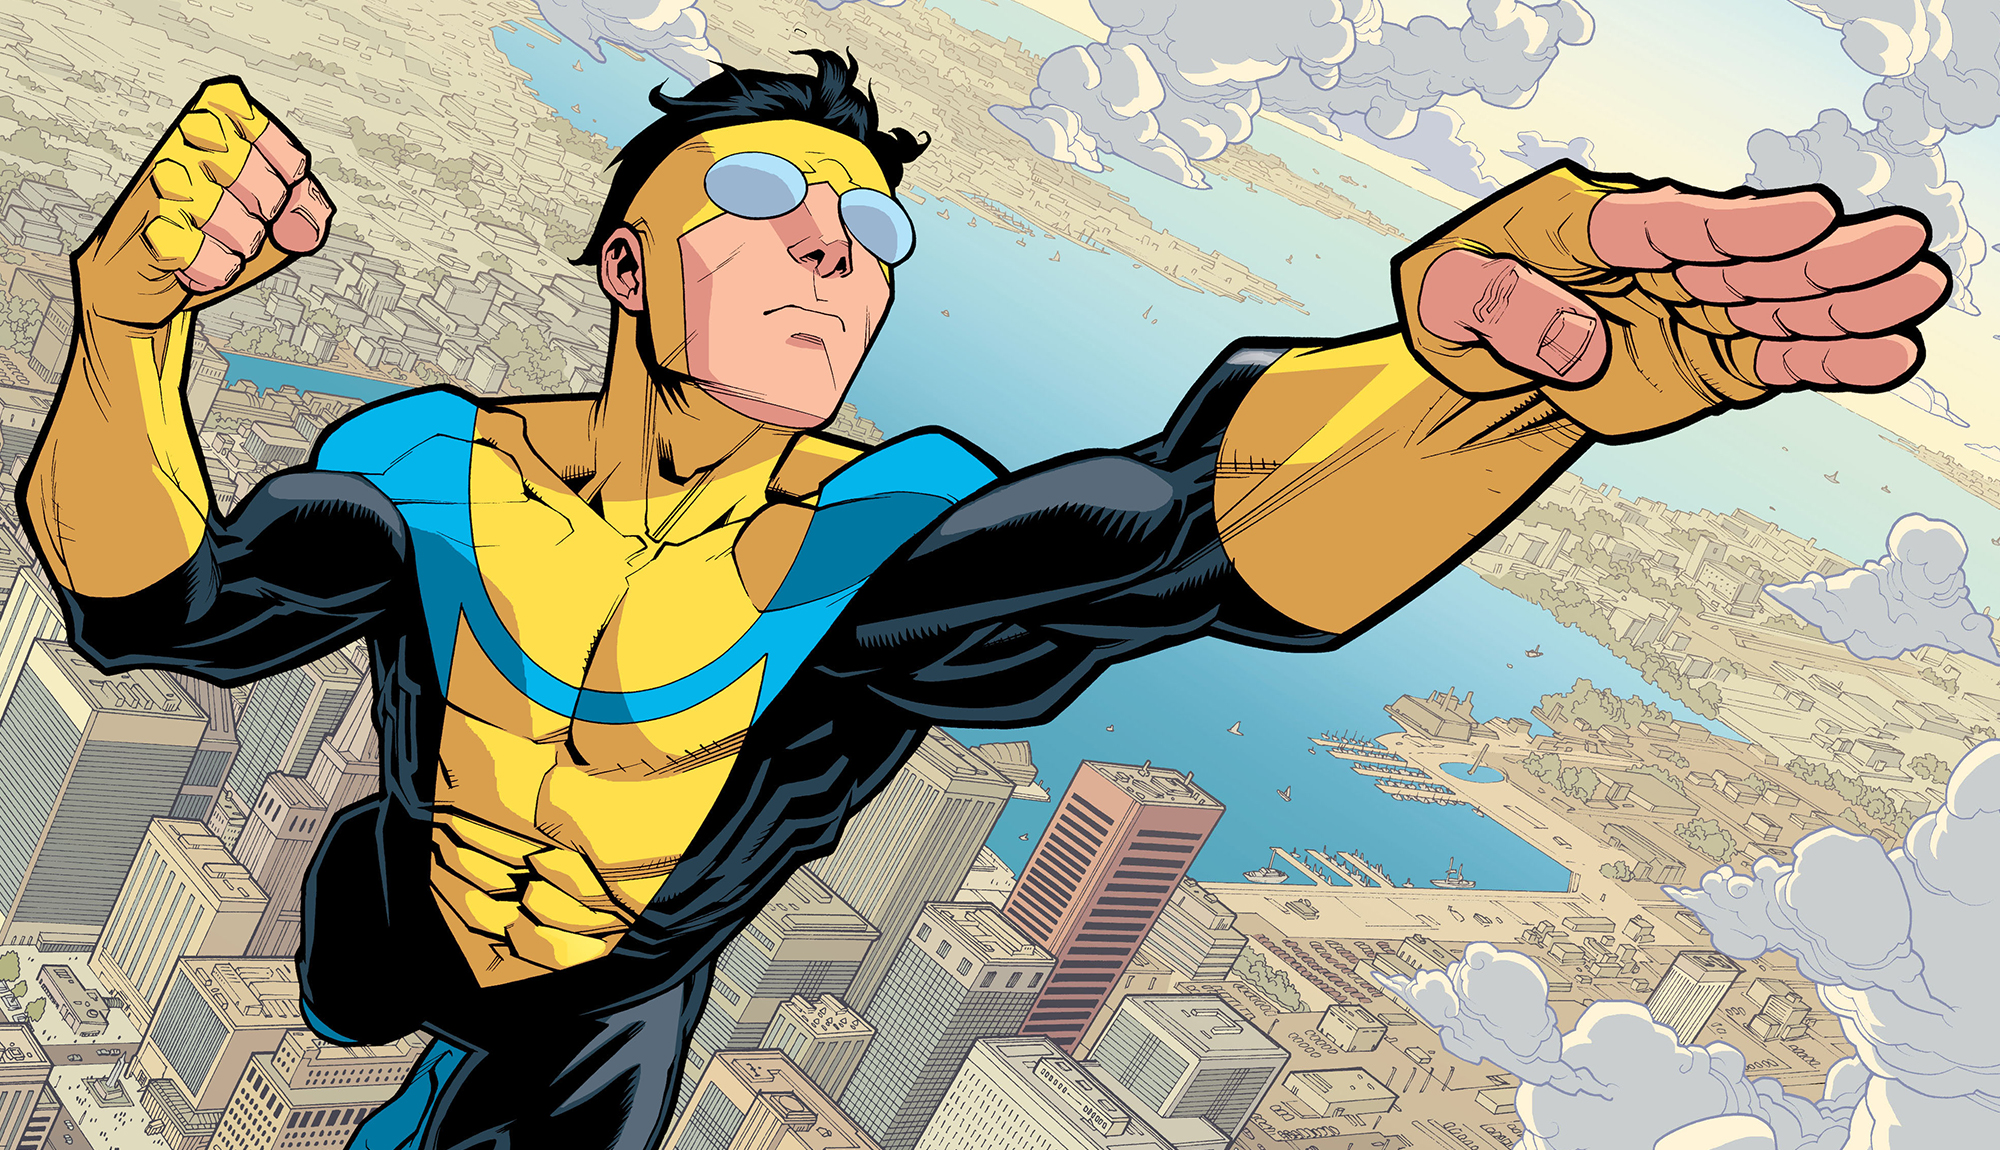 Invincible' Cast: Where Are They Now?